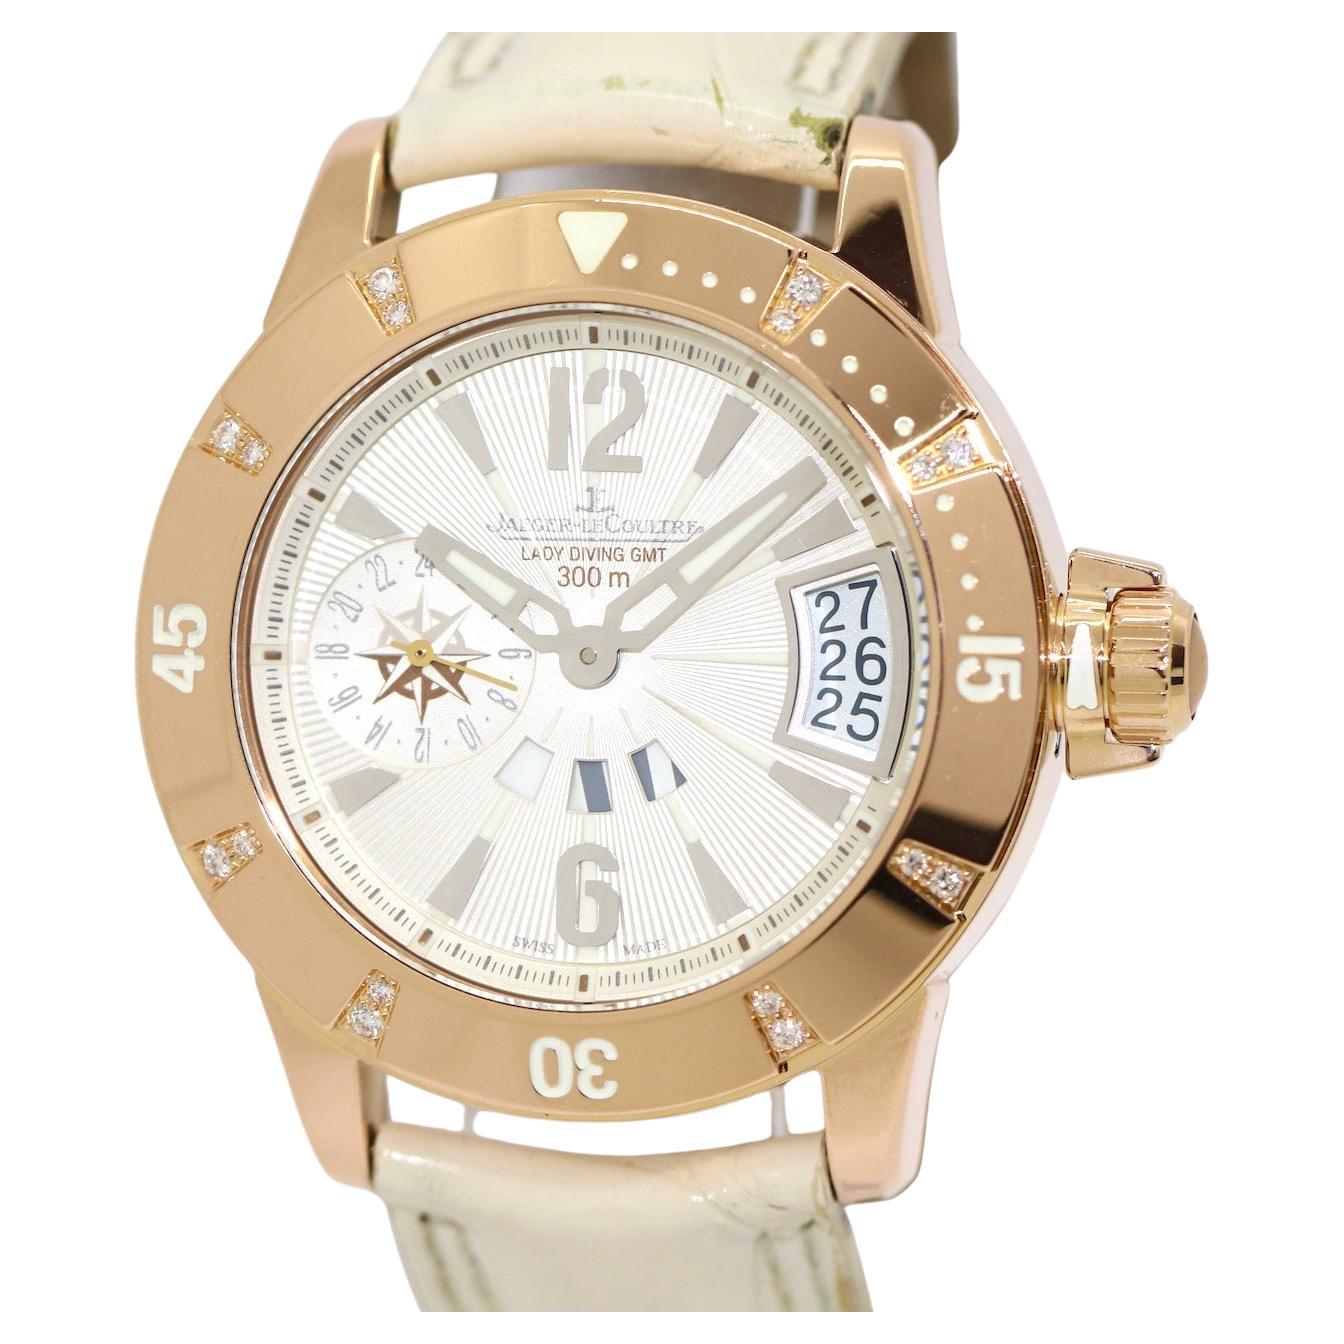 Jaeger-LeCoultre Master Compressor Lady Diving GMT, 18K Roségold and Diamonds For Sale